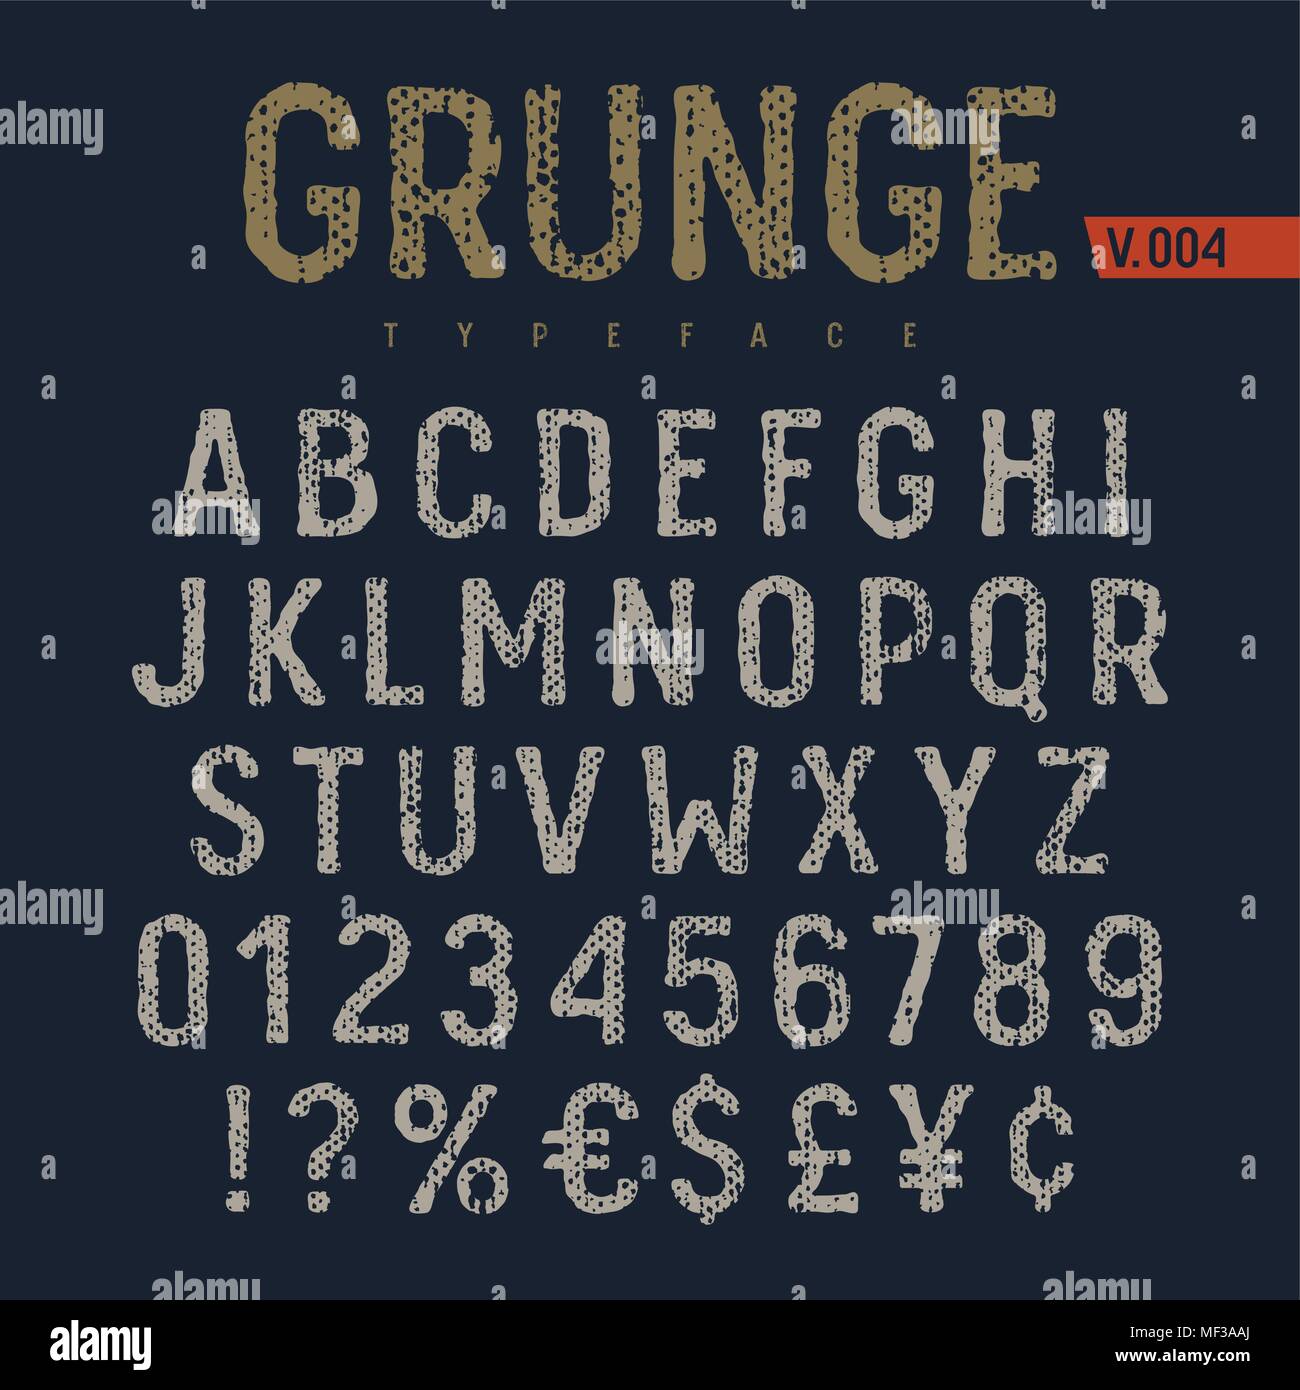 Grunge font. Rough fabric textured alphabet. Latin alphabet letters and numbers. Vectors Stock Vector